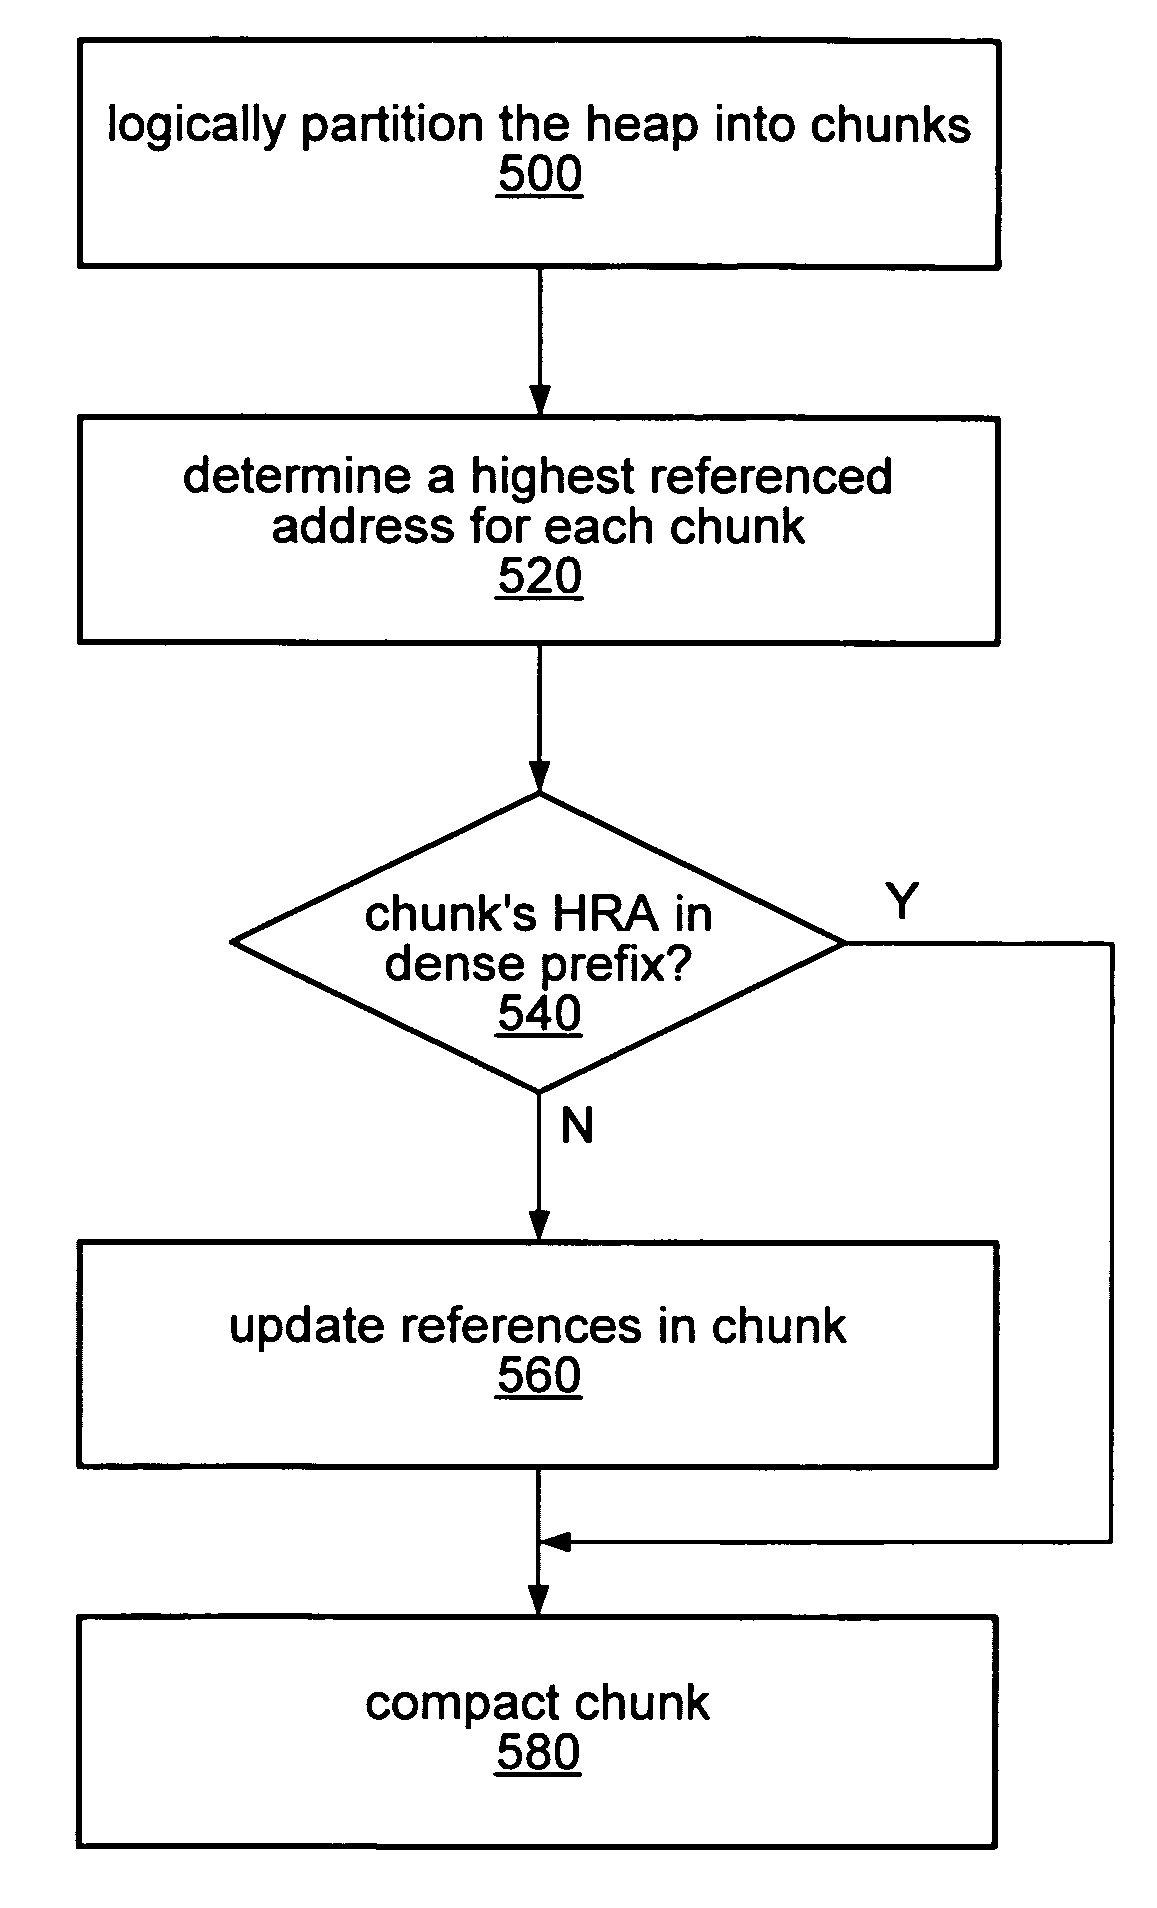 Reference-updating using per-chunk referenced-address ranges in a compacting garbage collector